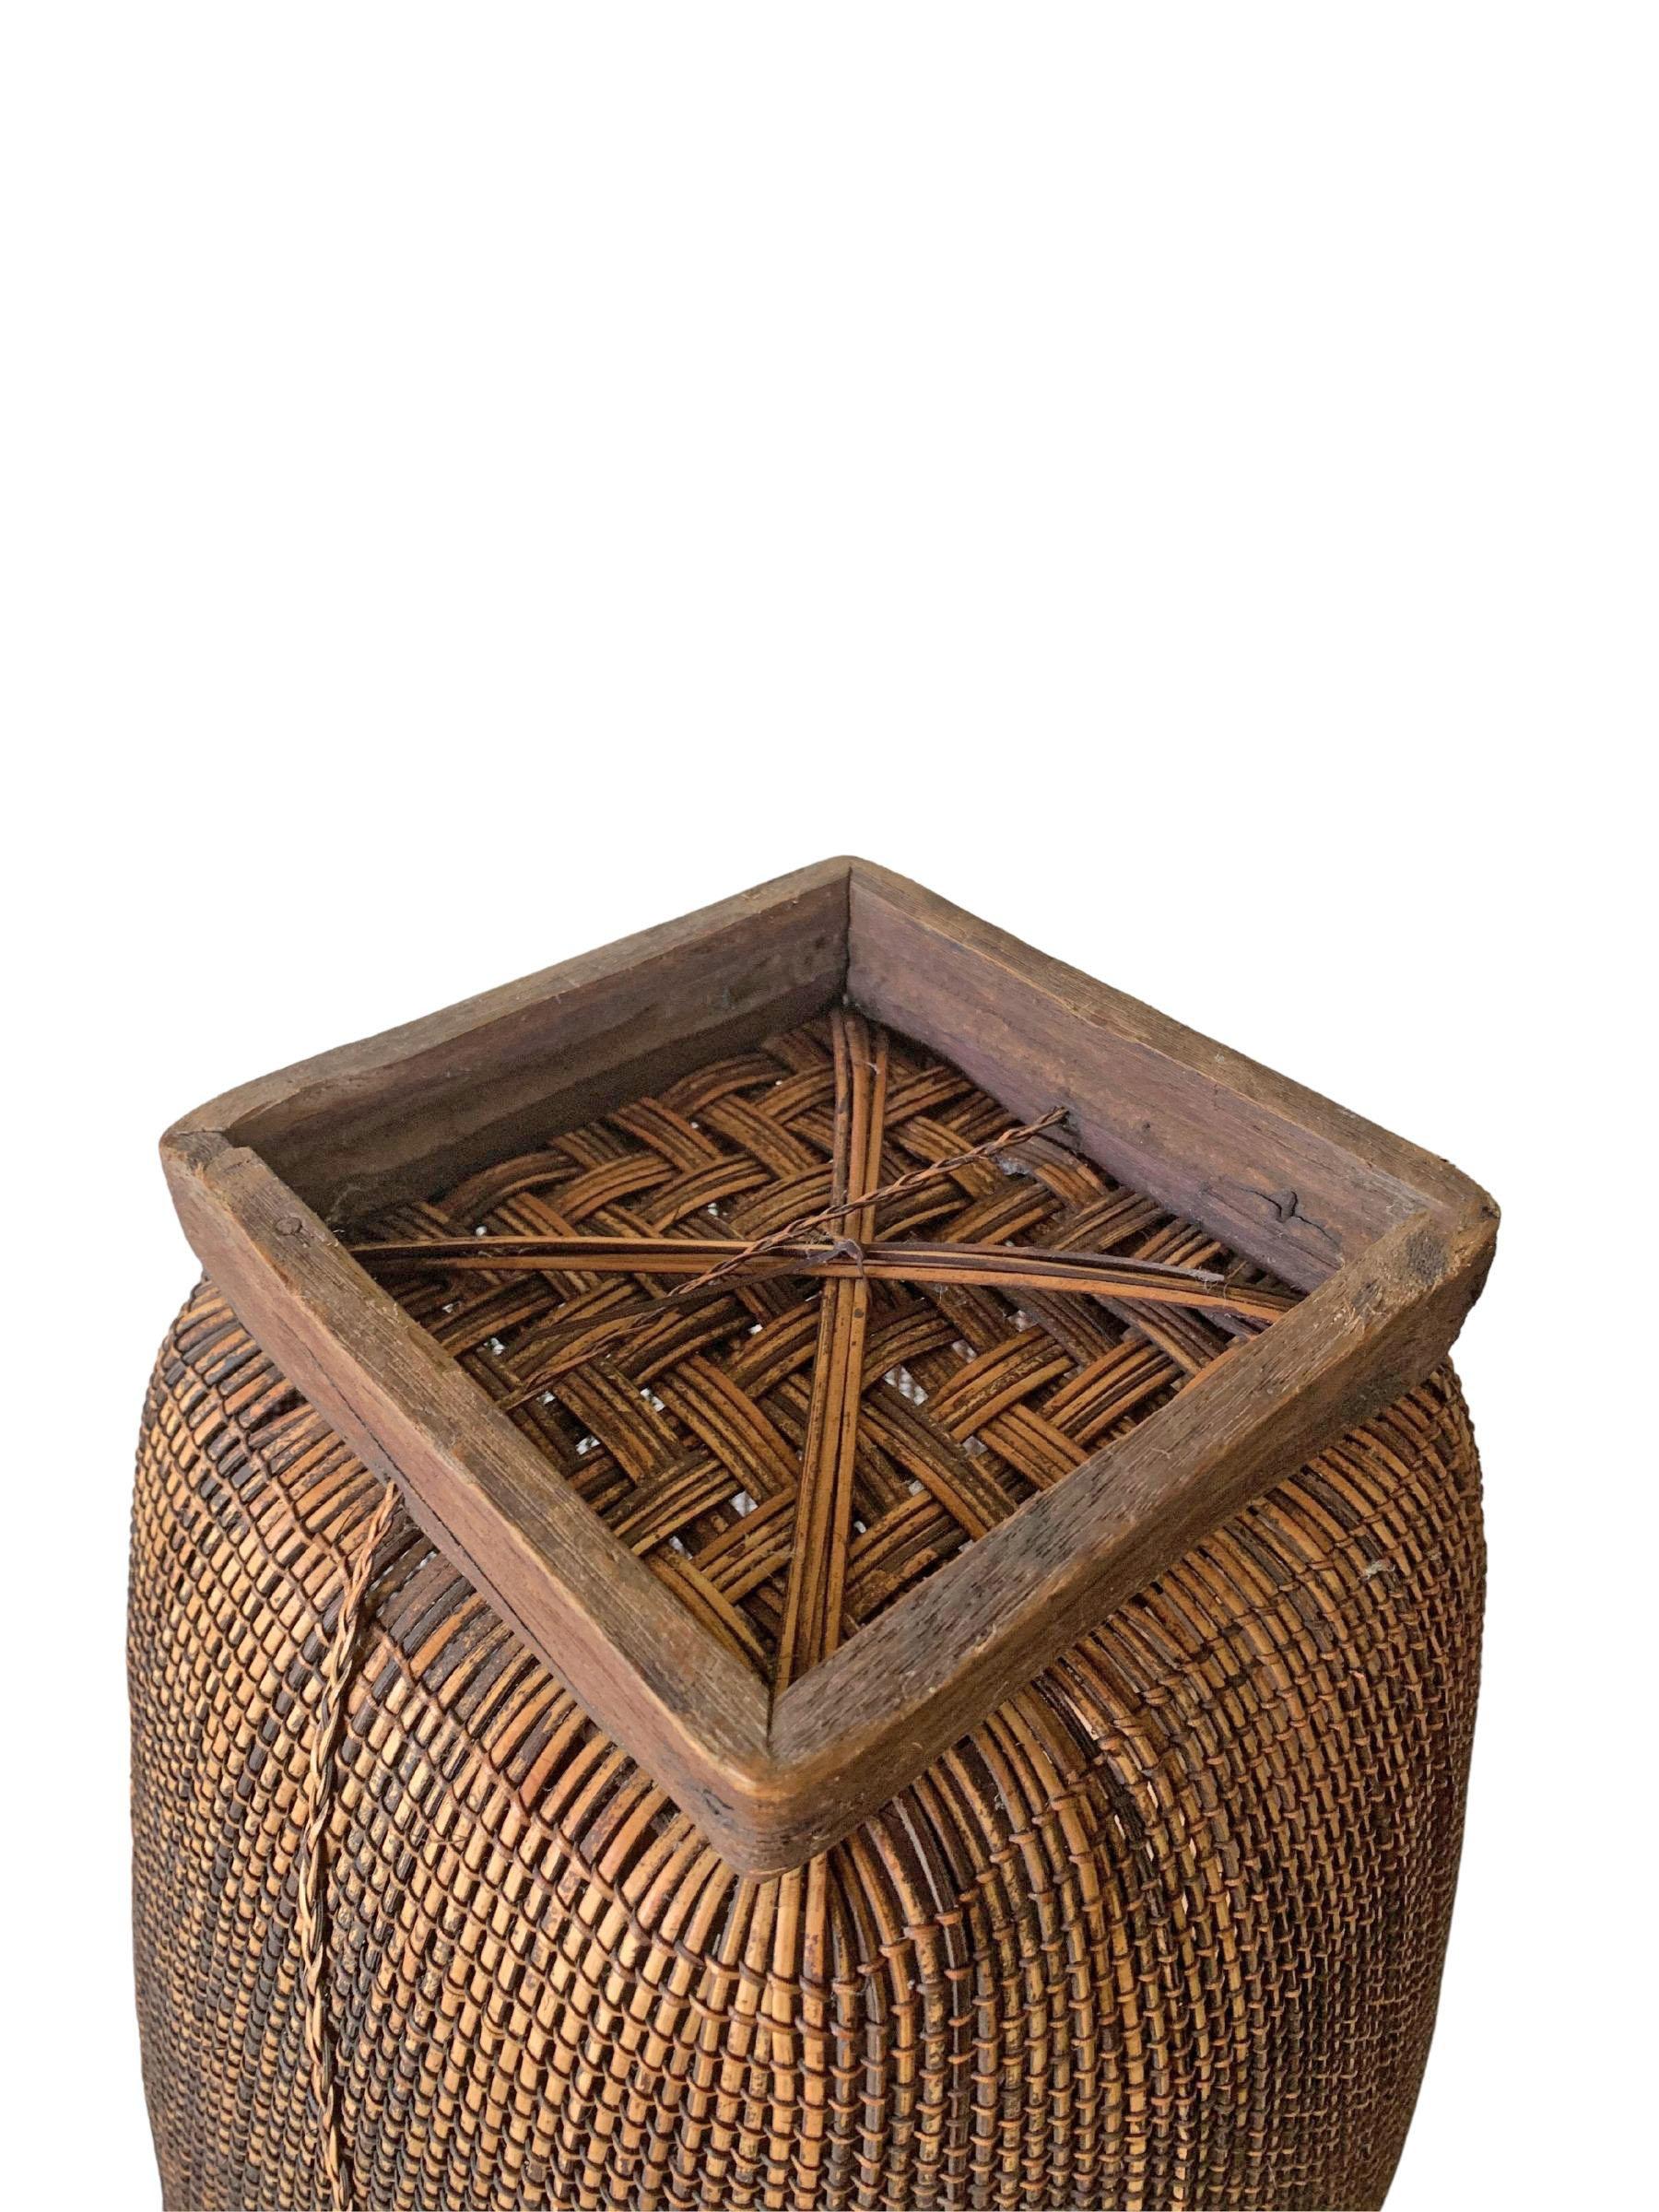 Bamboo & Rattan Basket from Dayak Tribe, Hand-Crafted Borneo, Indonesia, c. 1950 For Sale 3